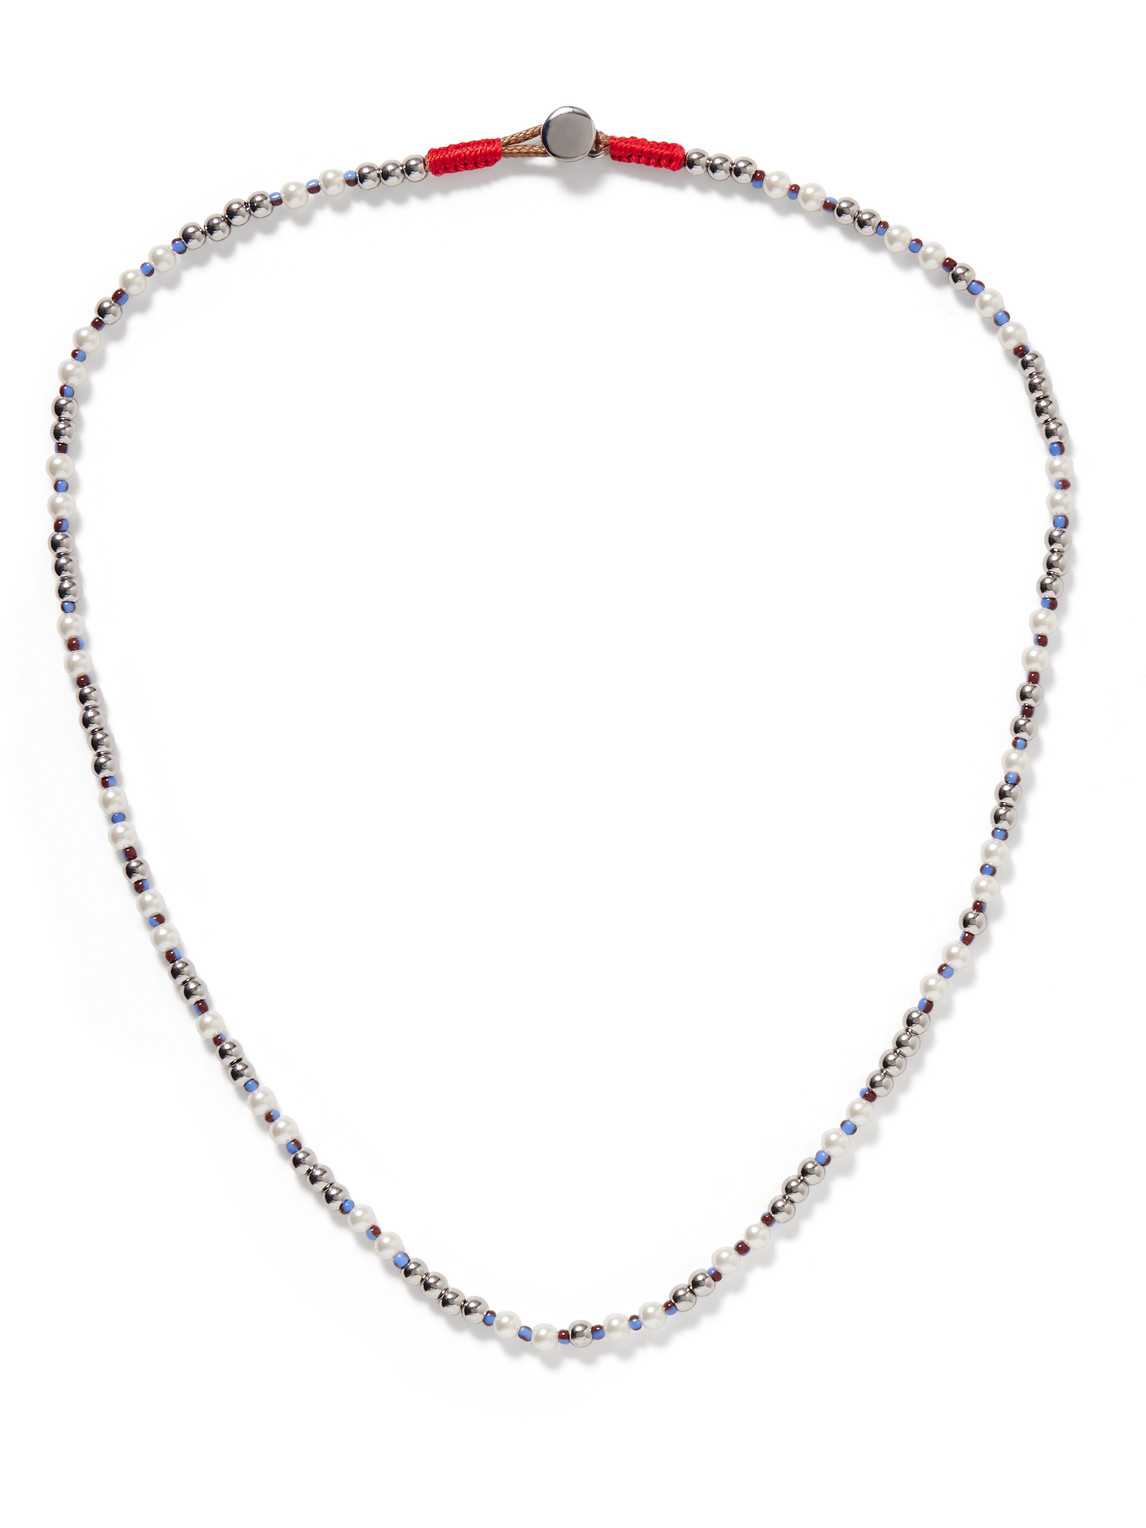 Roxanne Assoulin Silver-tone, Faux Pearl And Enamel Beaded Necklace